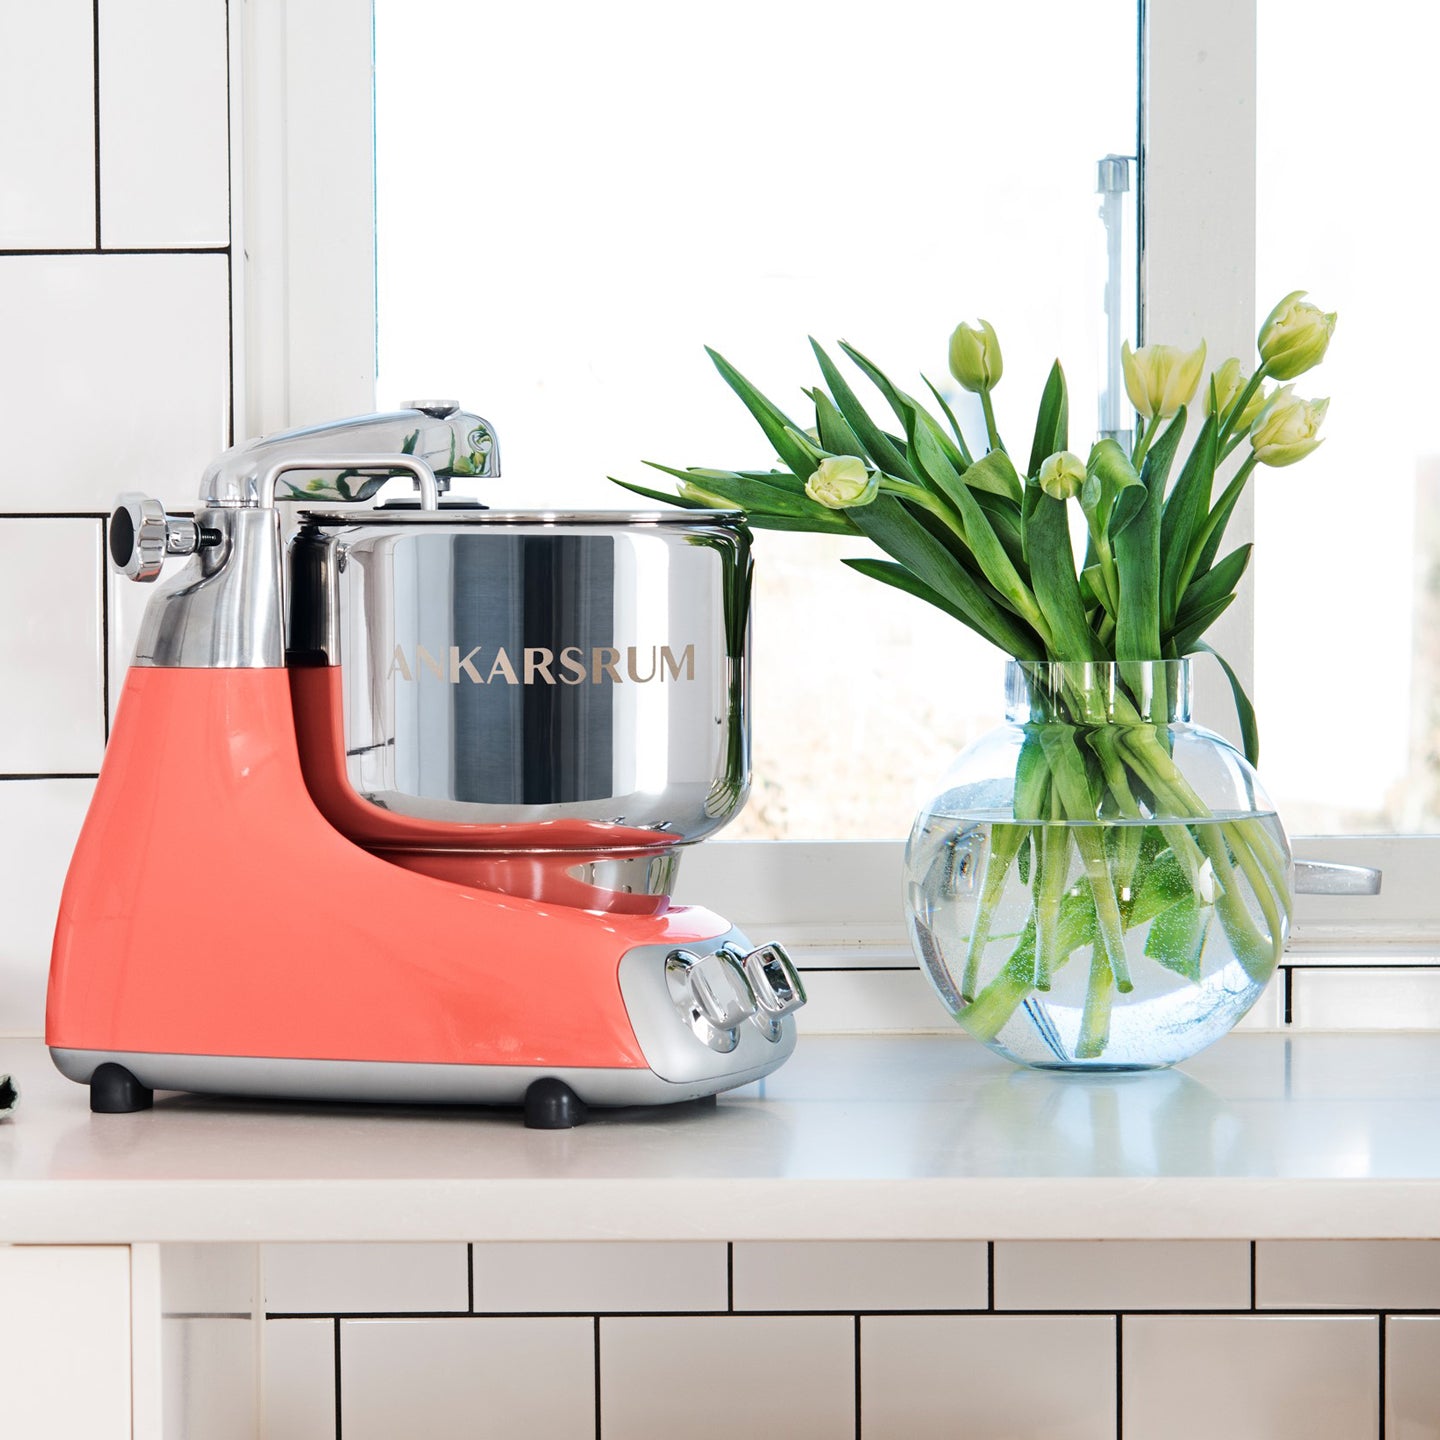 Ankarsrum Adds Coral Crush Color to Stand Mixer Lineup